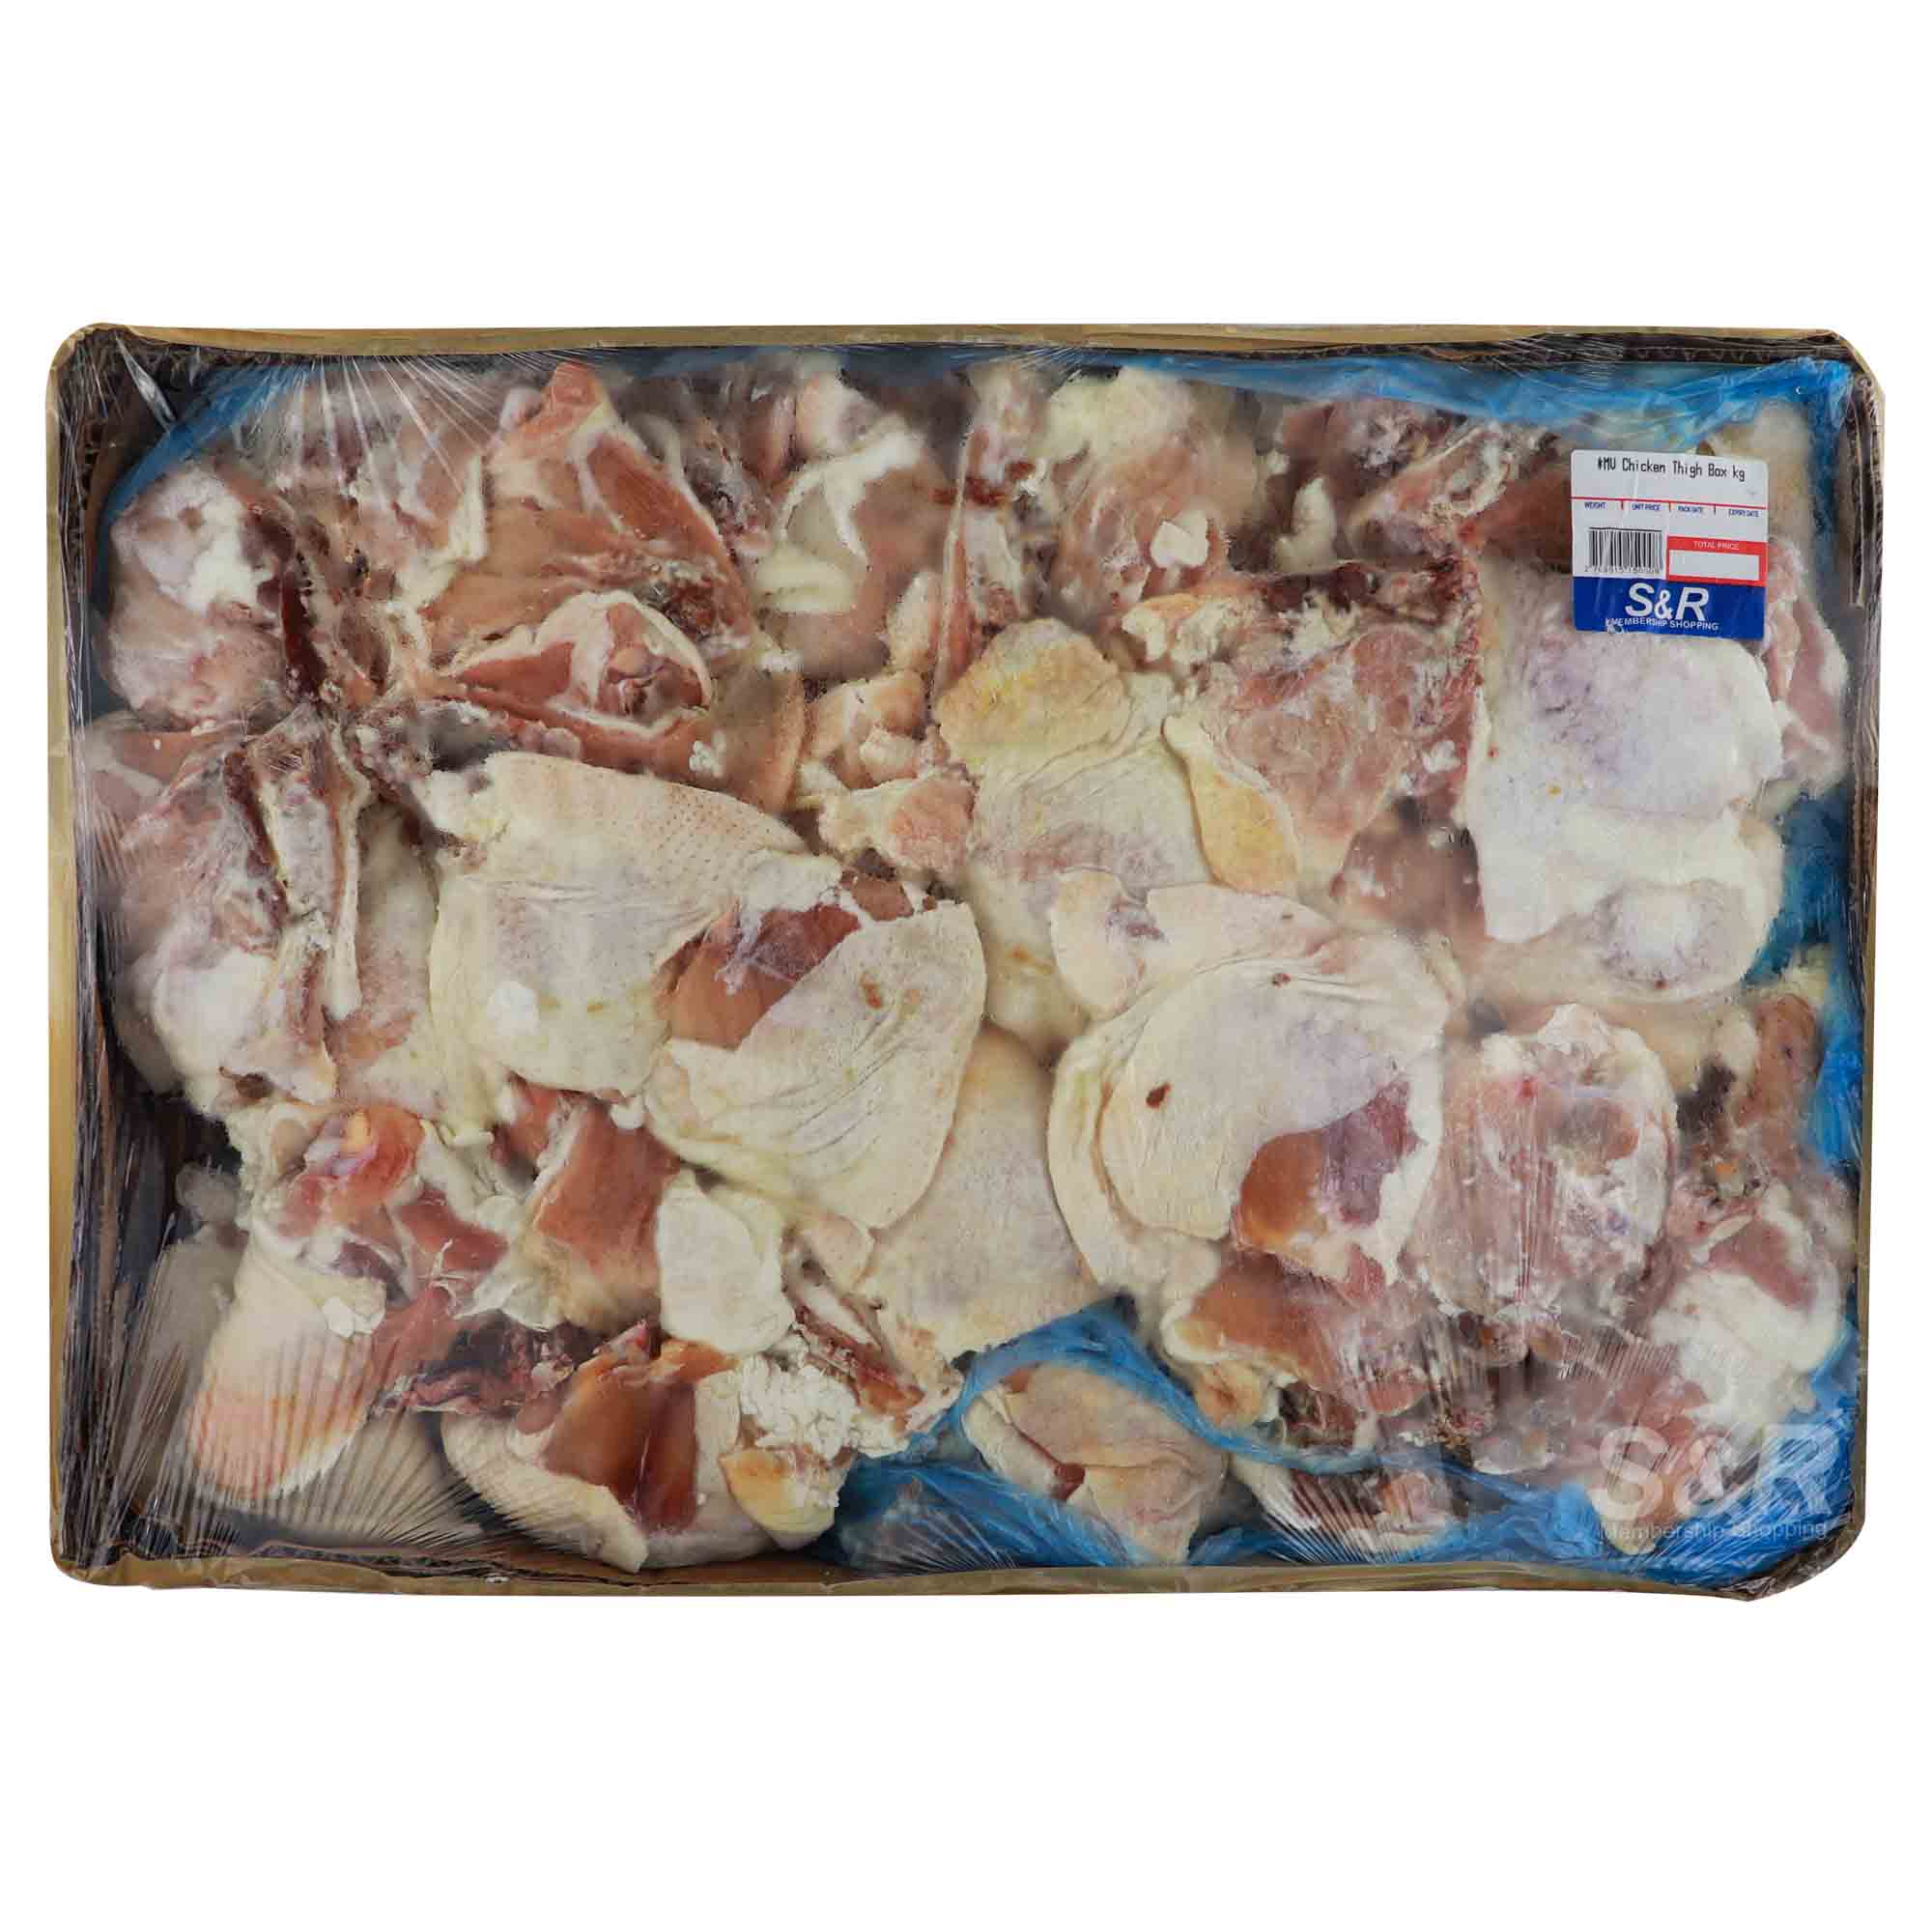 Members' Value Chicken Thigh with Back approx. 15.1kg